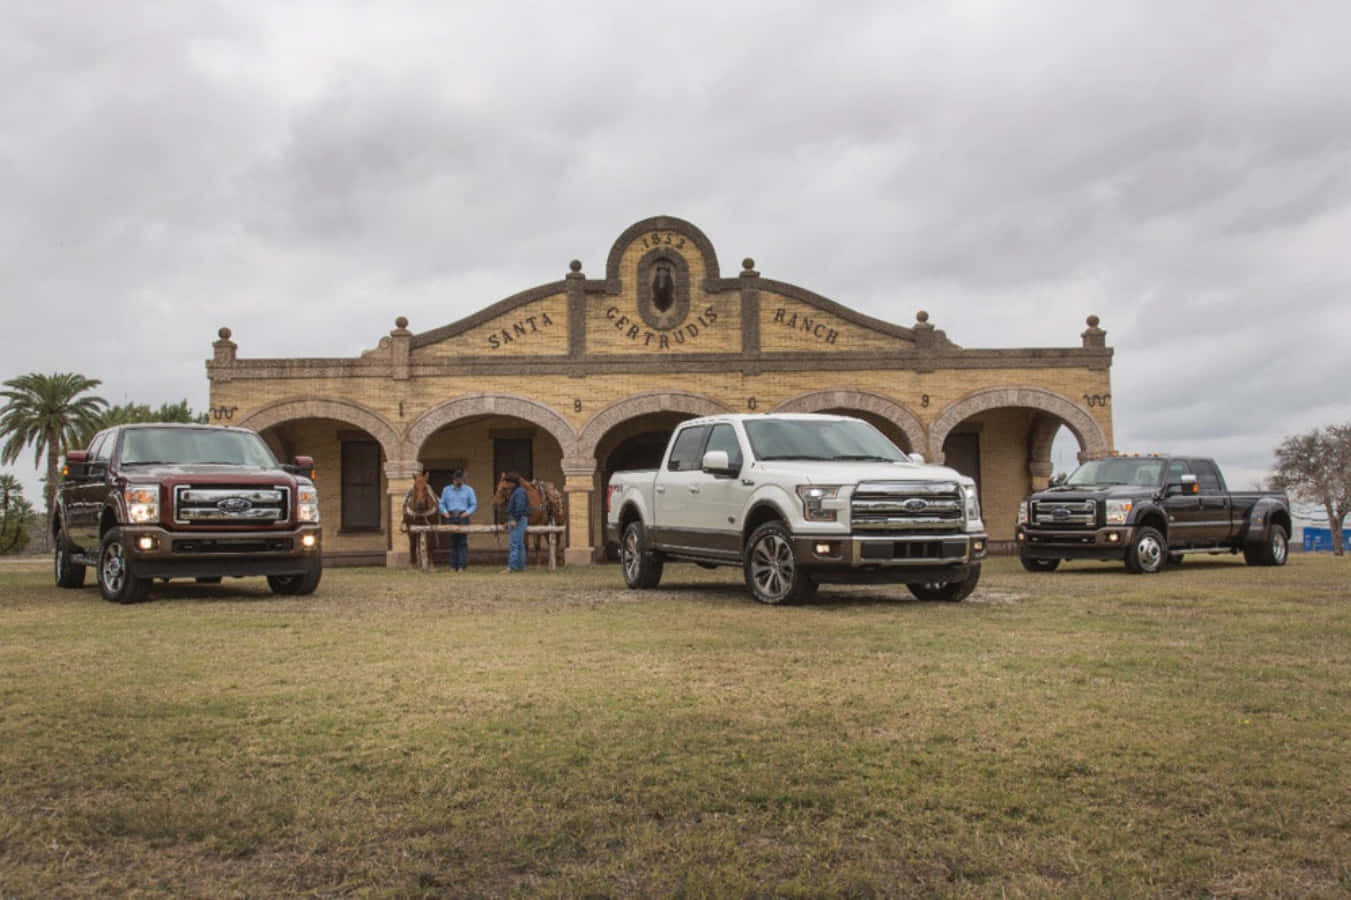 “Explore The Expansive Beauty of King Ranch Texas”